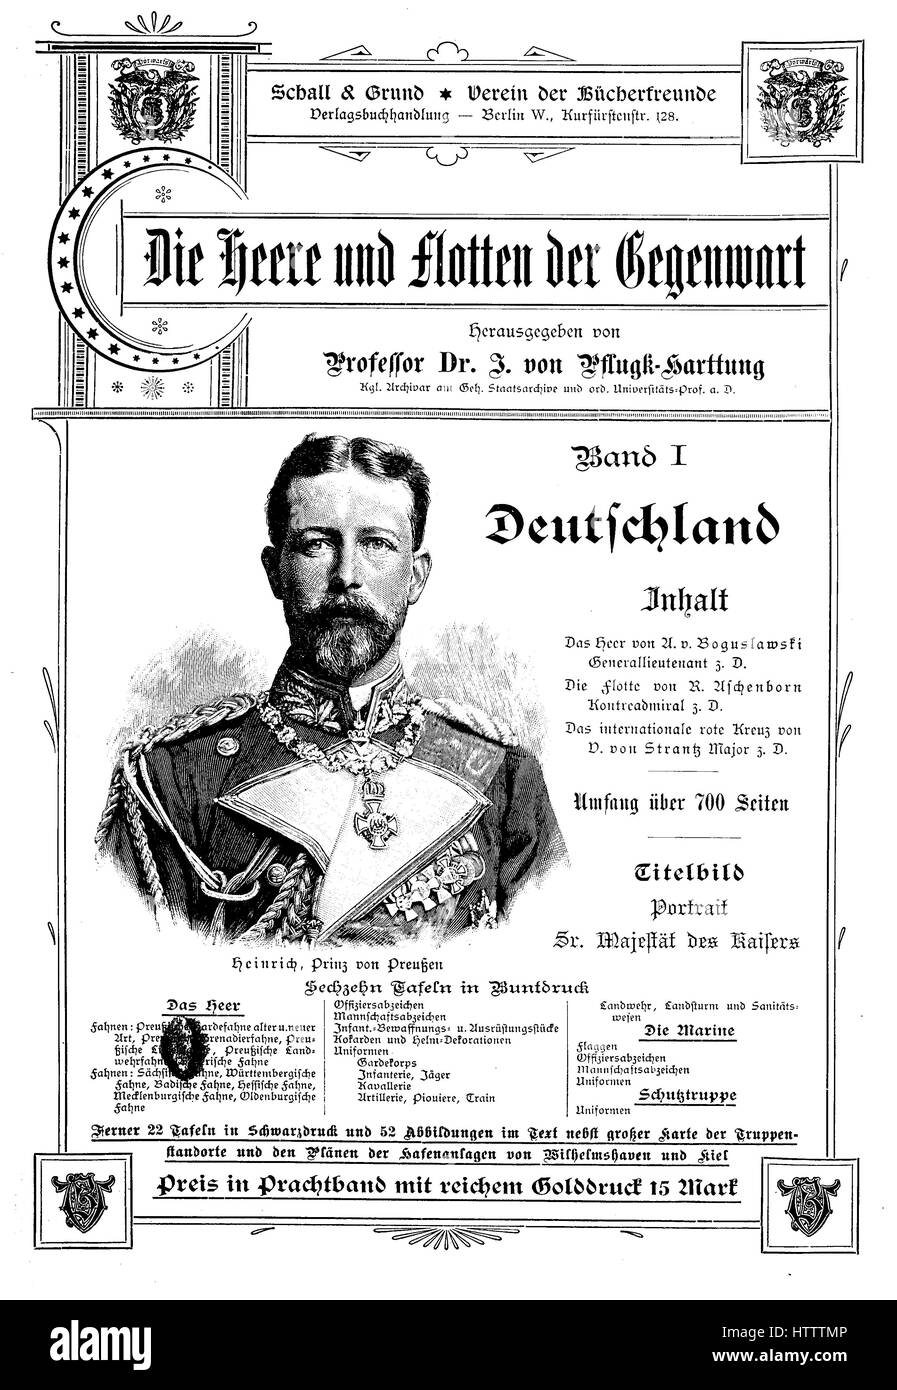 Advertising for the book titled, Die Heere und Flotten der Gegenwart, with the portrait of Prince Friedrich Heinrich Ludwig von Preußen or Prince Frederick Henry Louis of Prussia, Germany, reproduction of a woodcut from 1882, digital improved Stock Photo